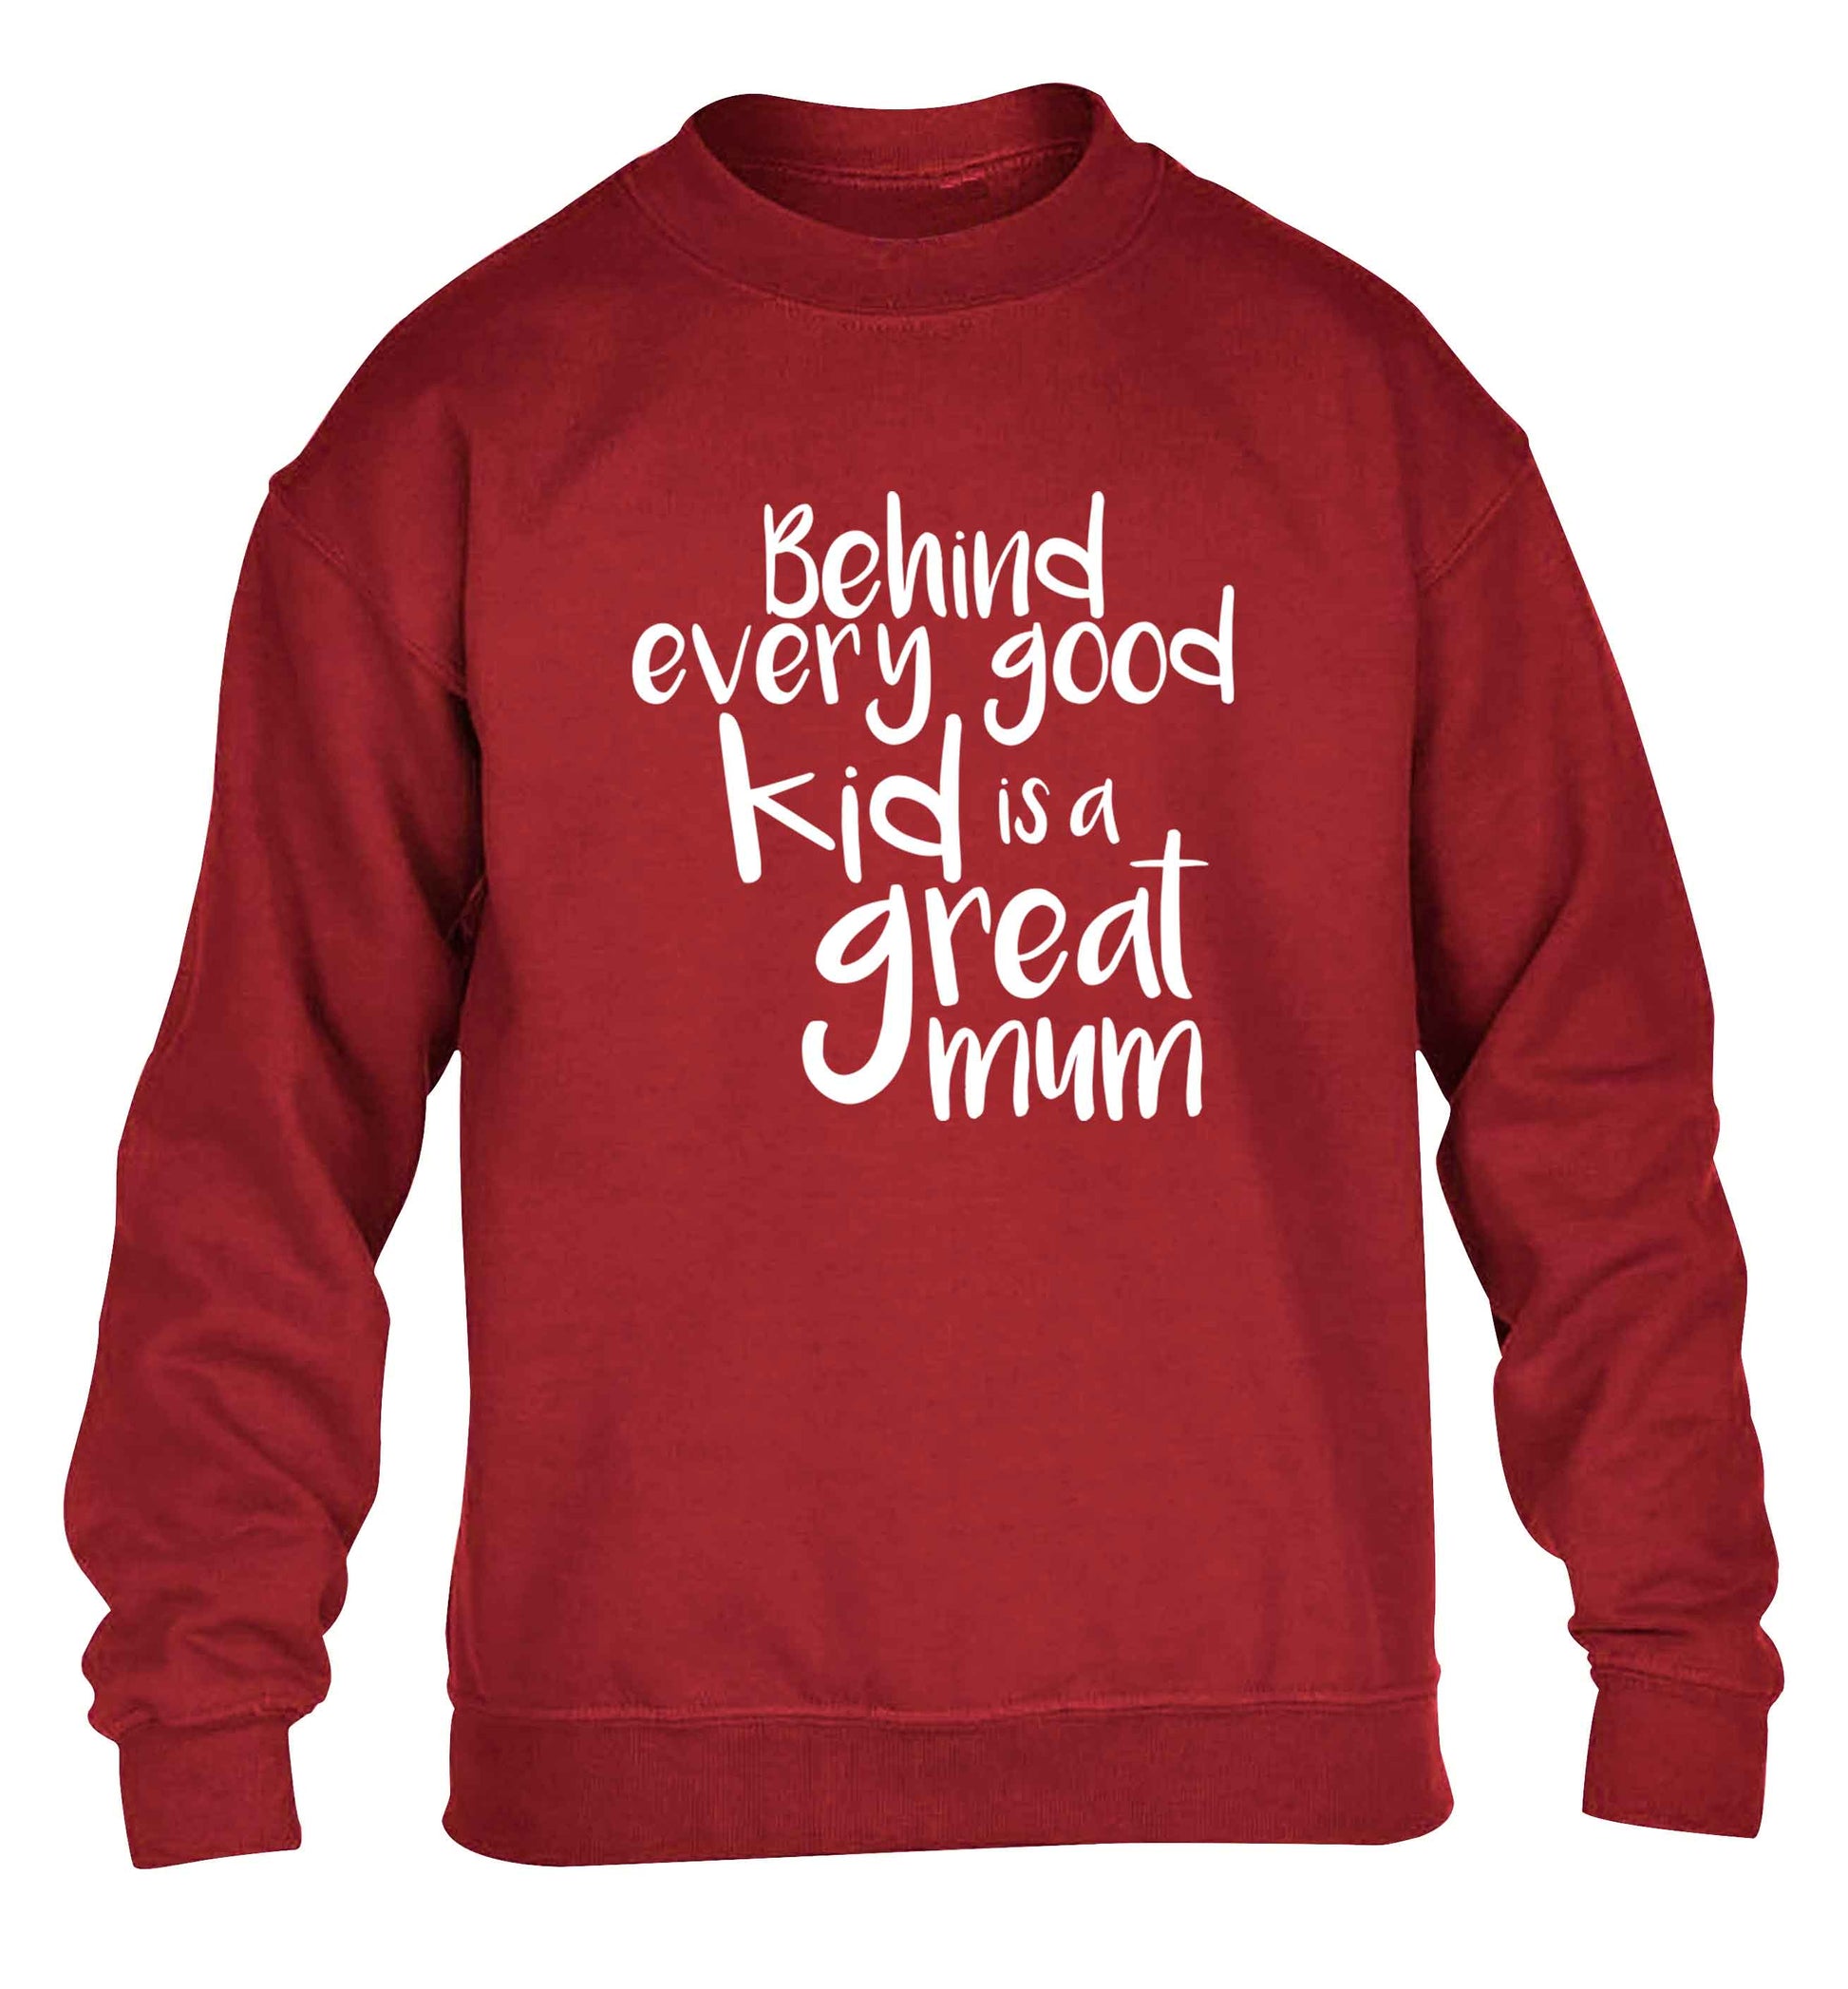 Behind every good kid is a great mum children's grey sweater 12-13 Years